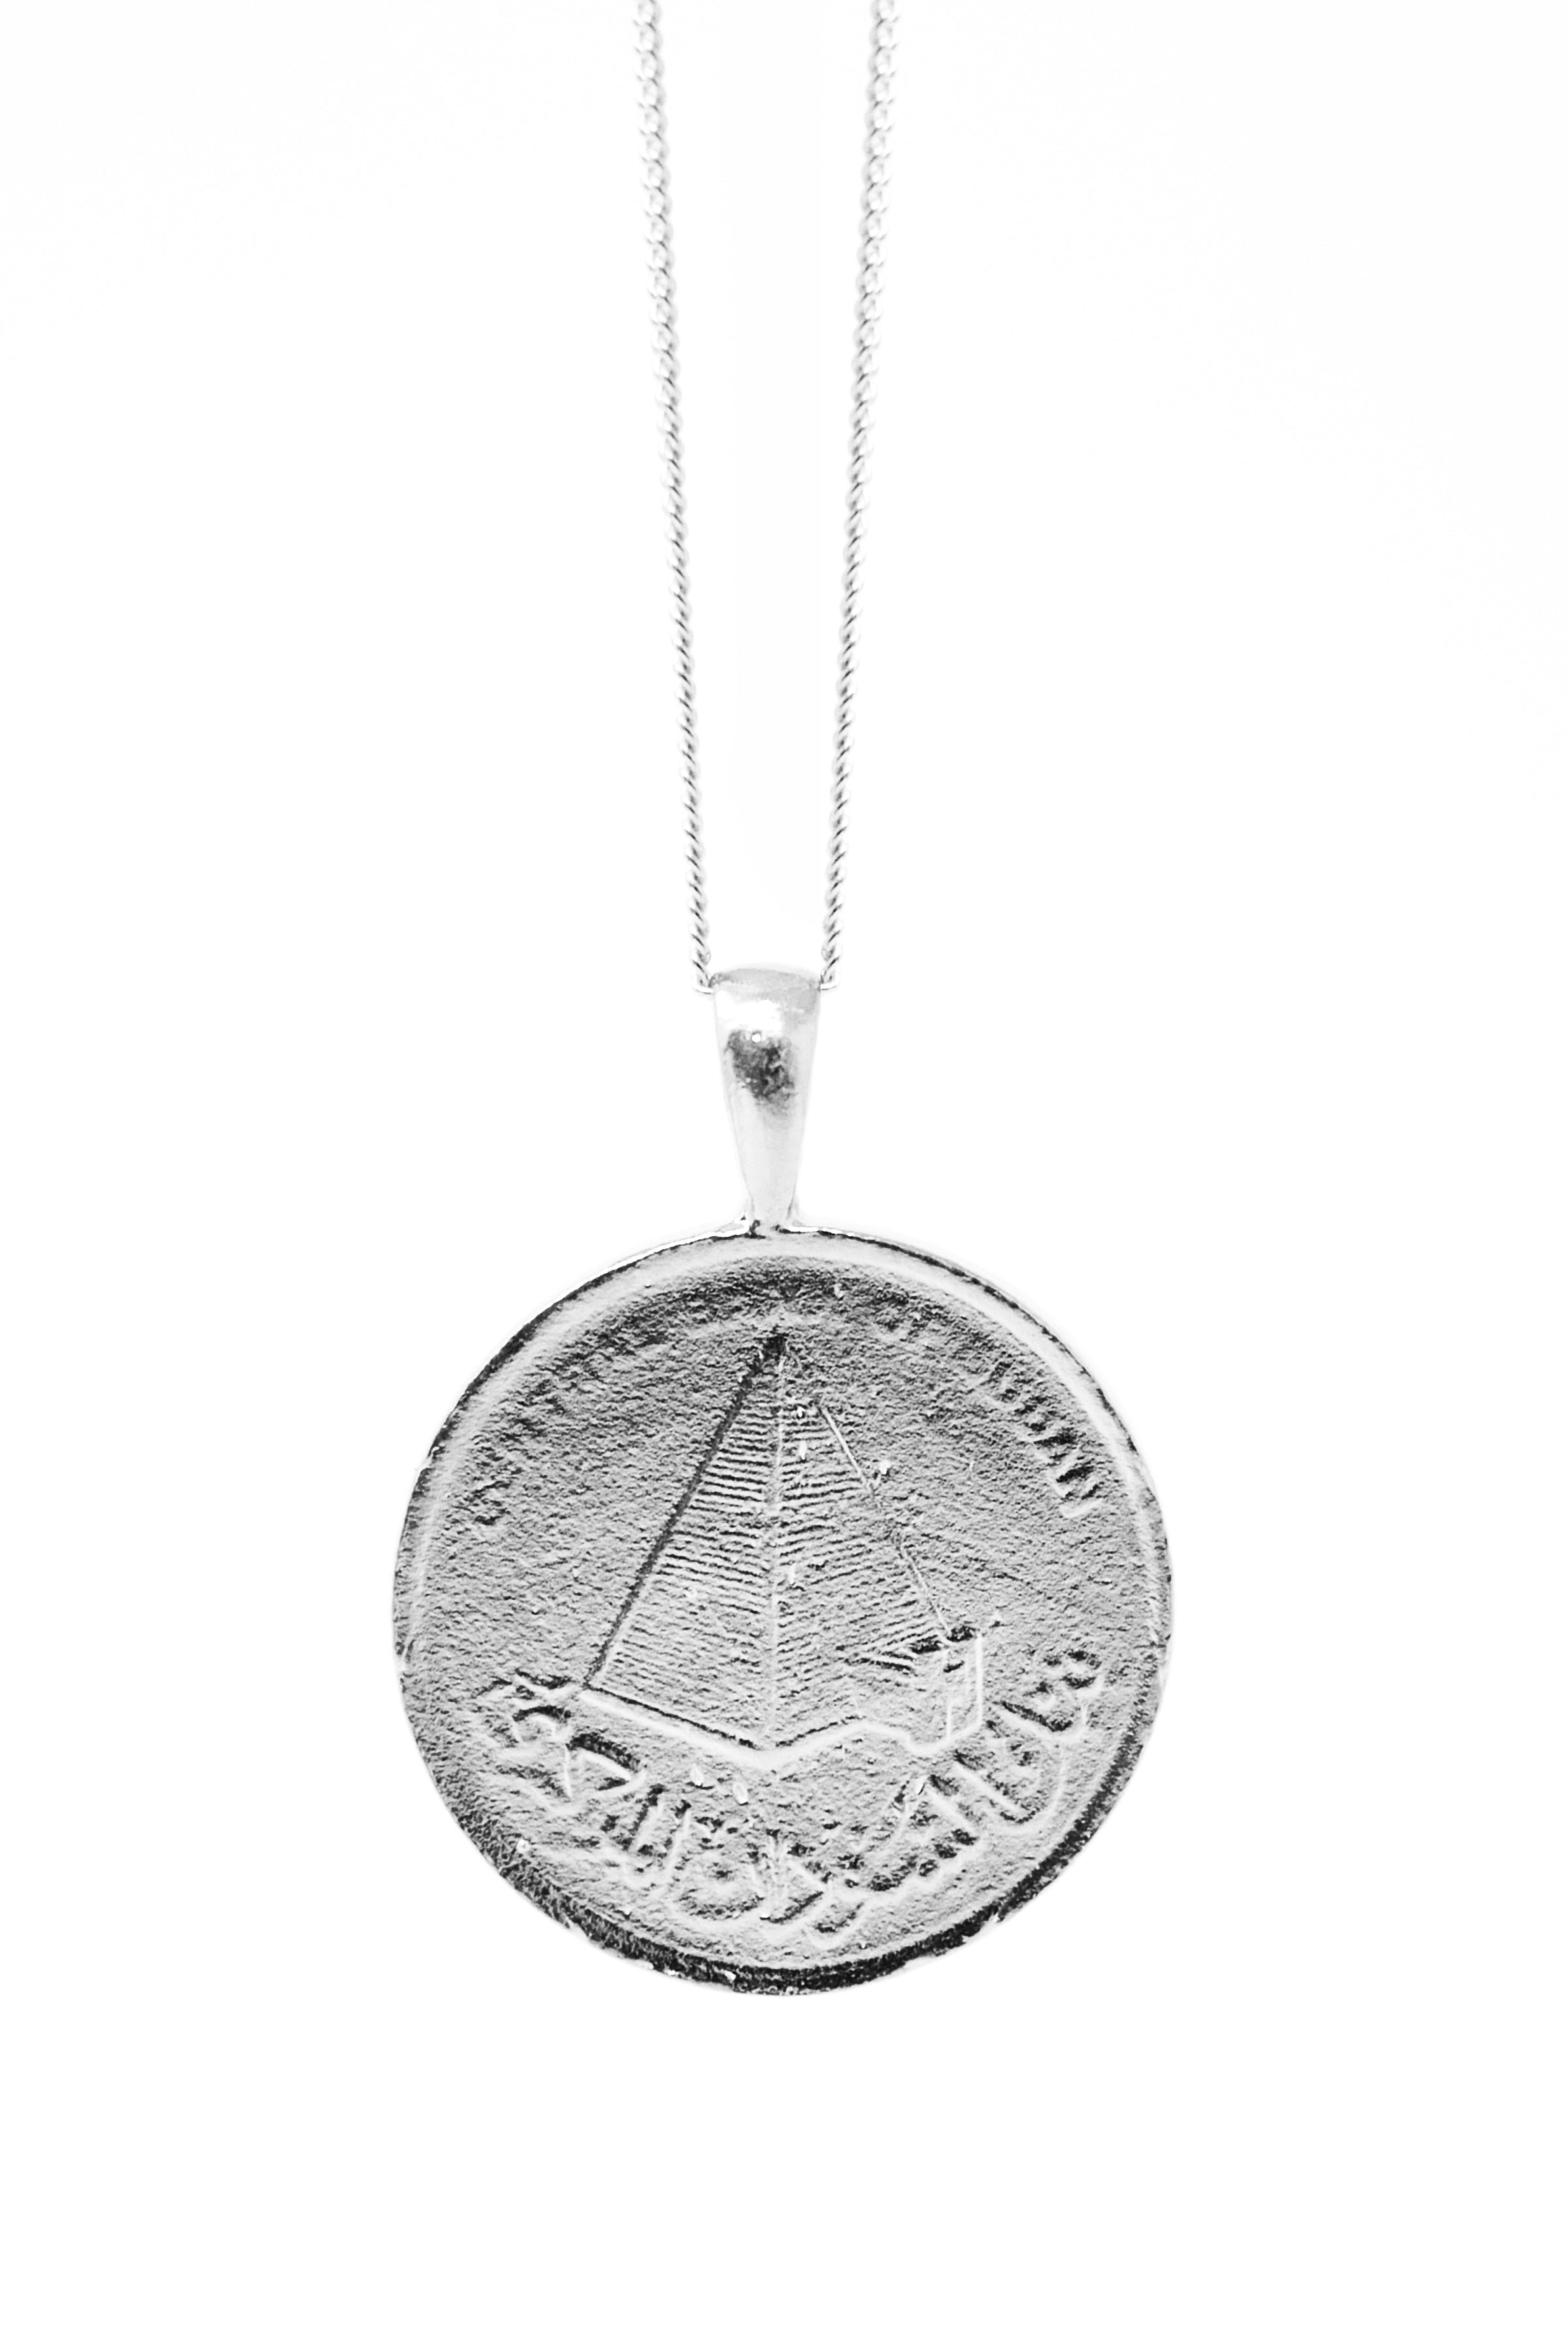 THE SUDAN Nubian Pyramid Coin Necklace